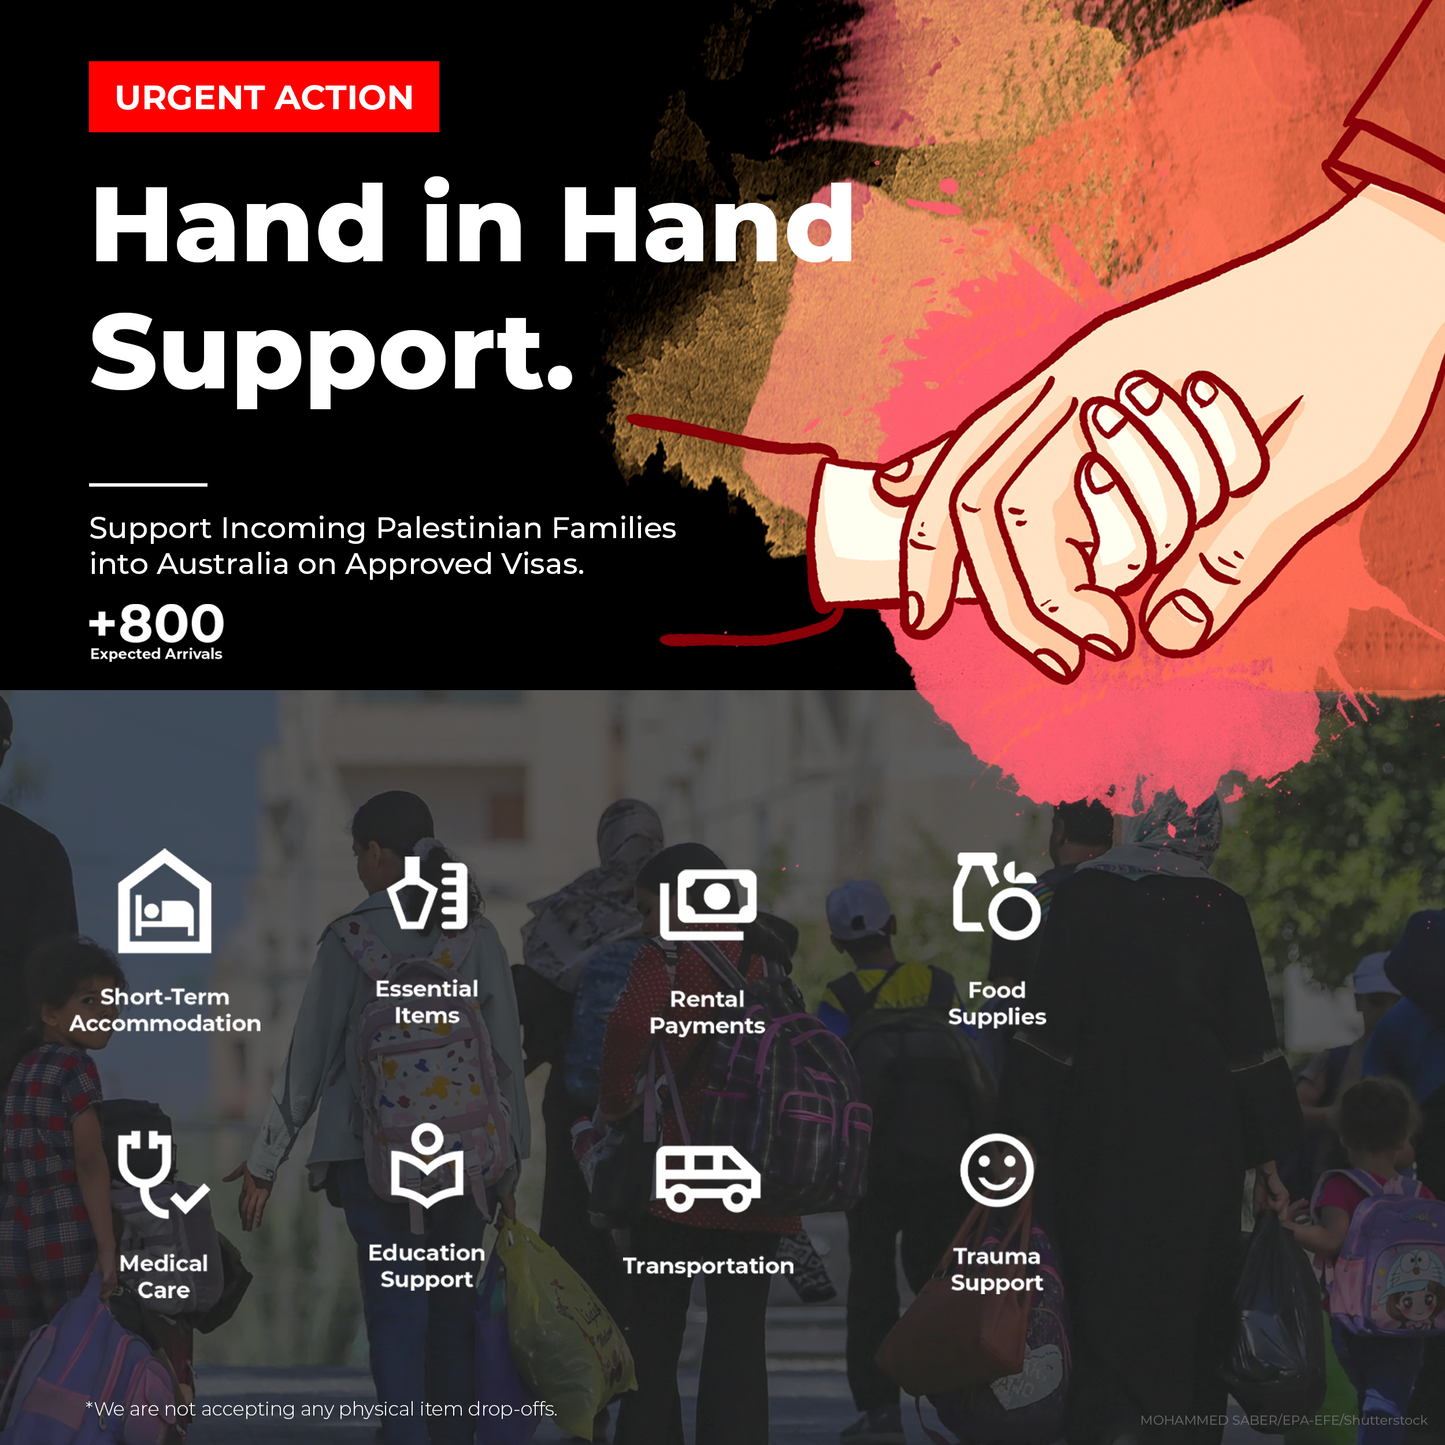 Hand in Hand Support - Local Distribution